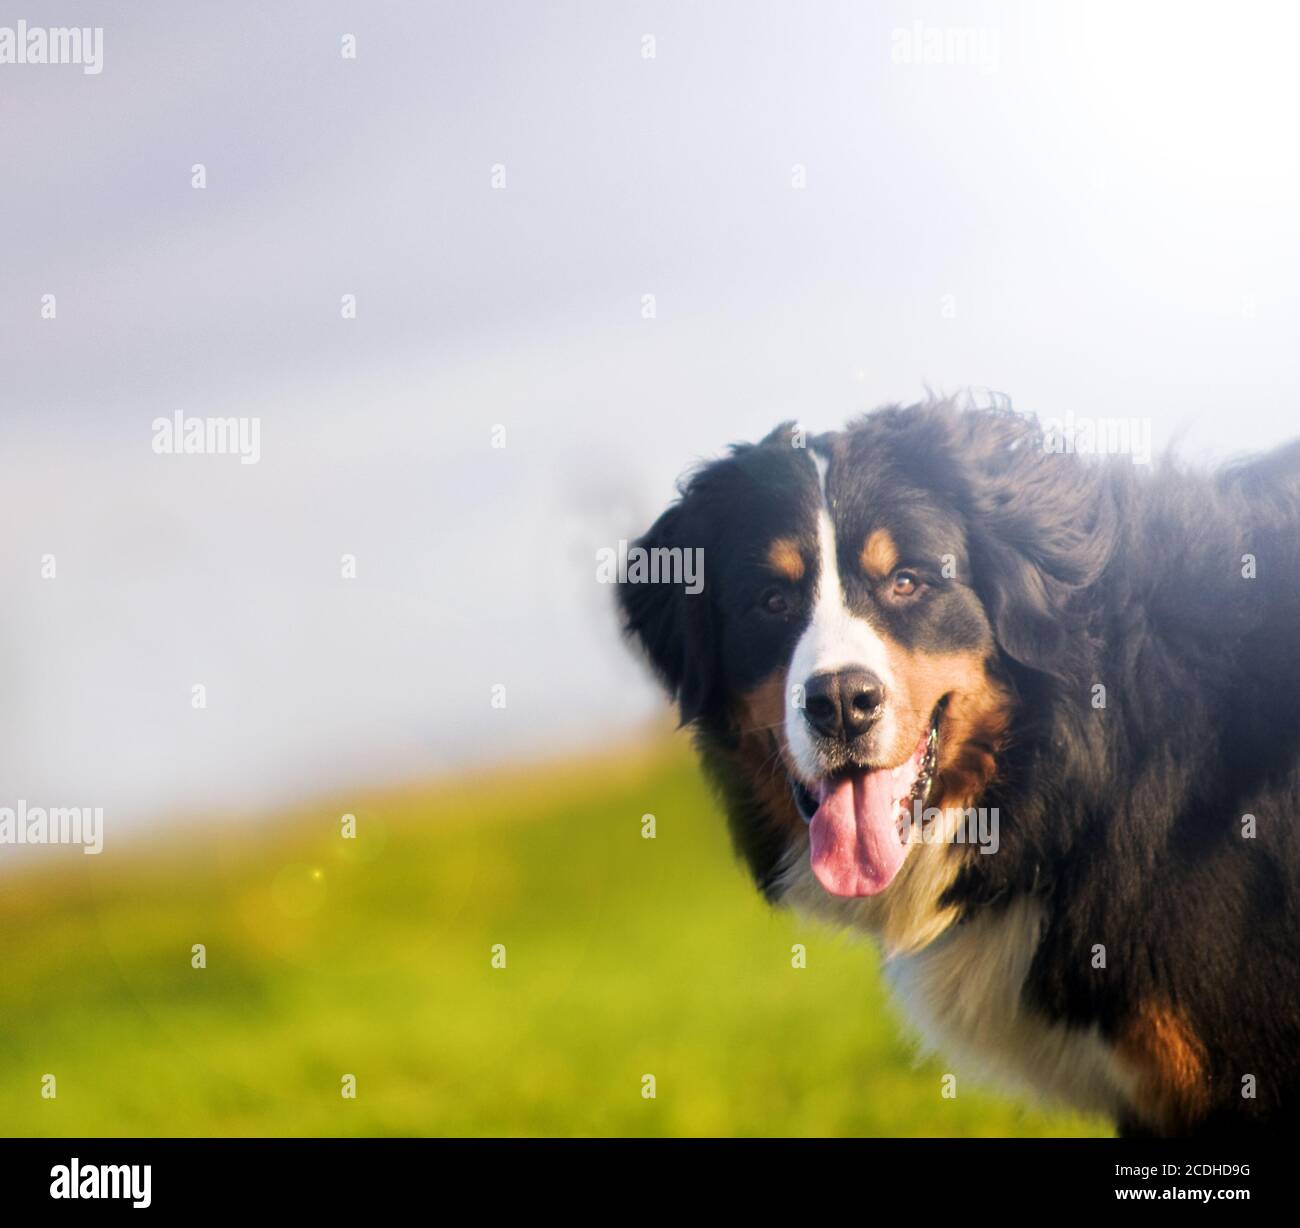 Cute happy dog portrait in spring sunny day. Bernese mountain dog Stock Photo